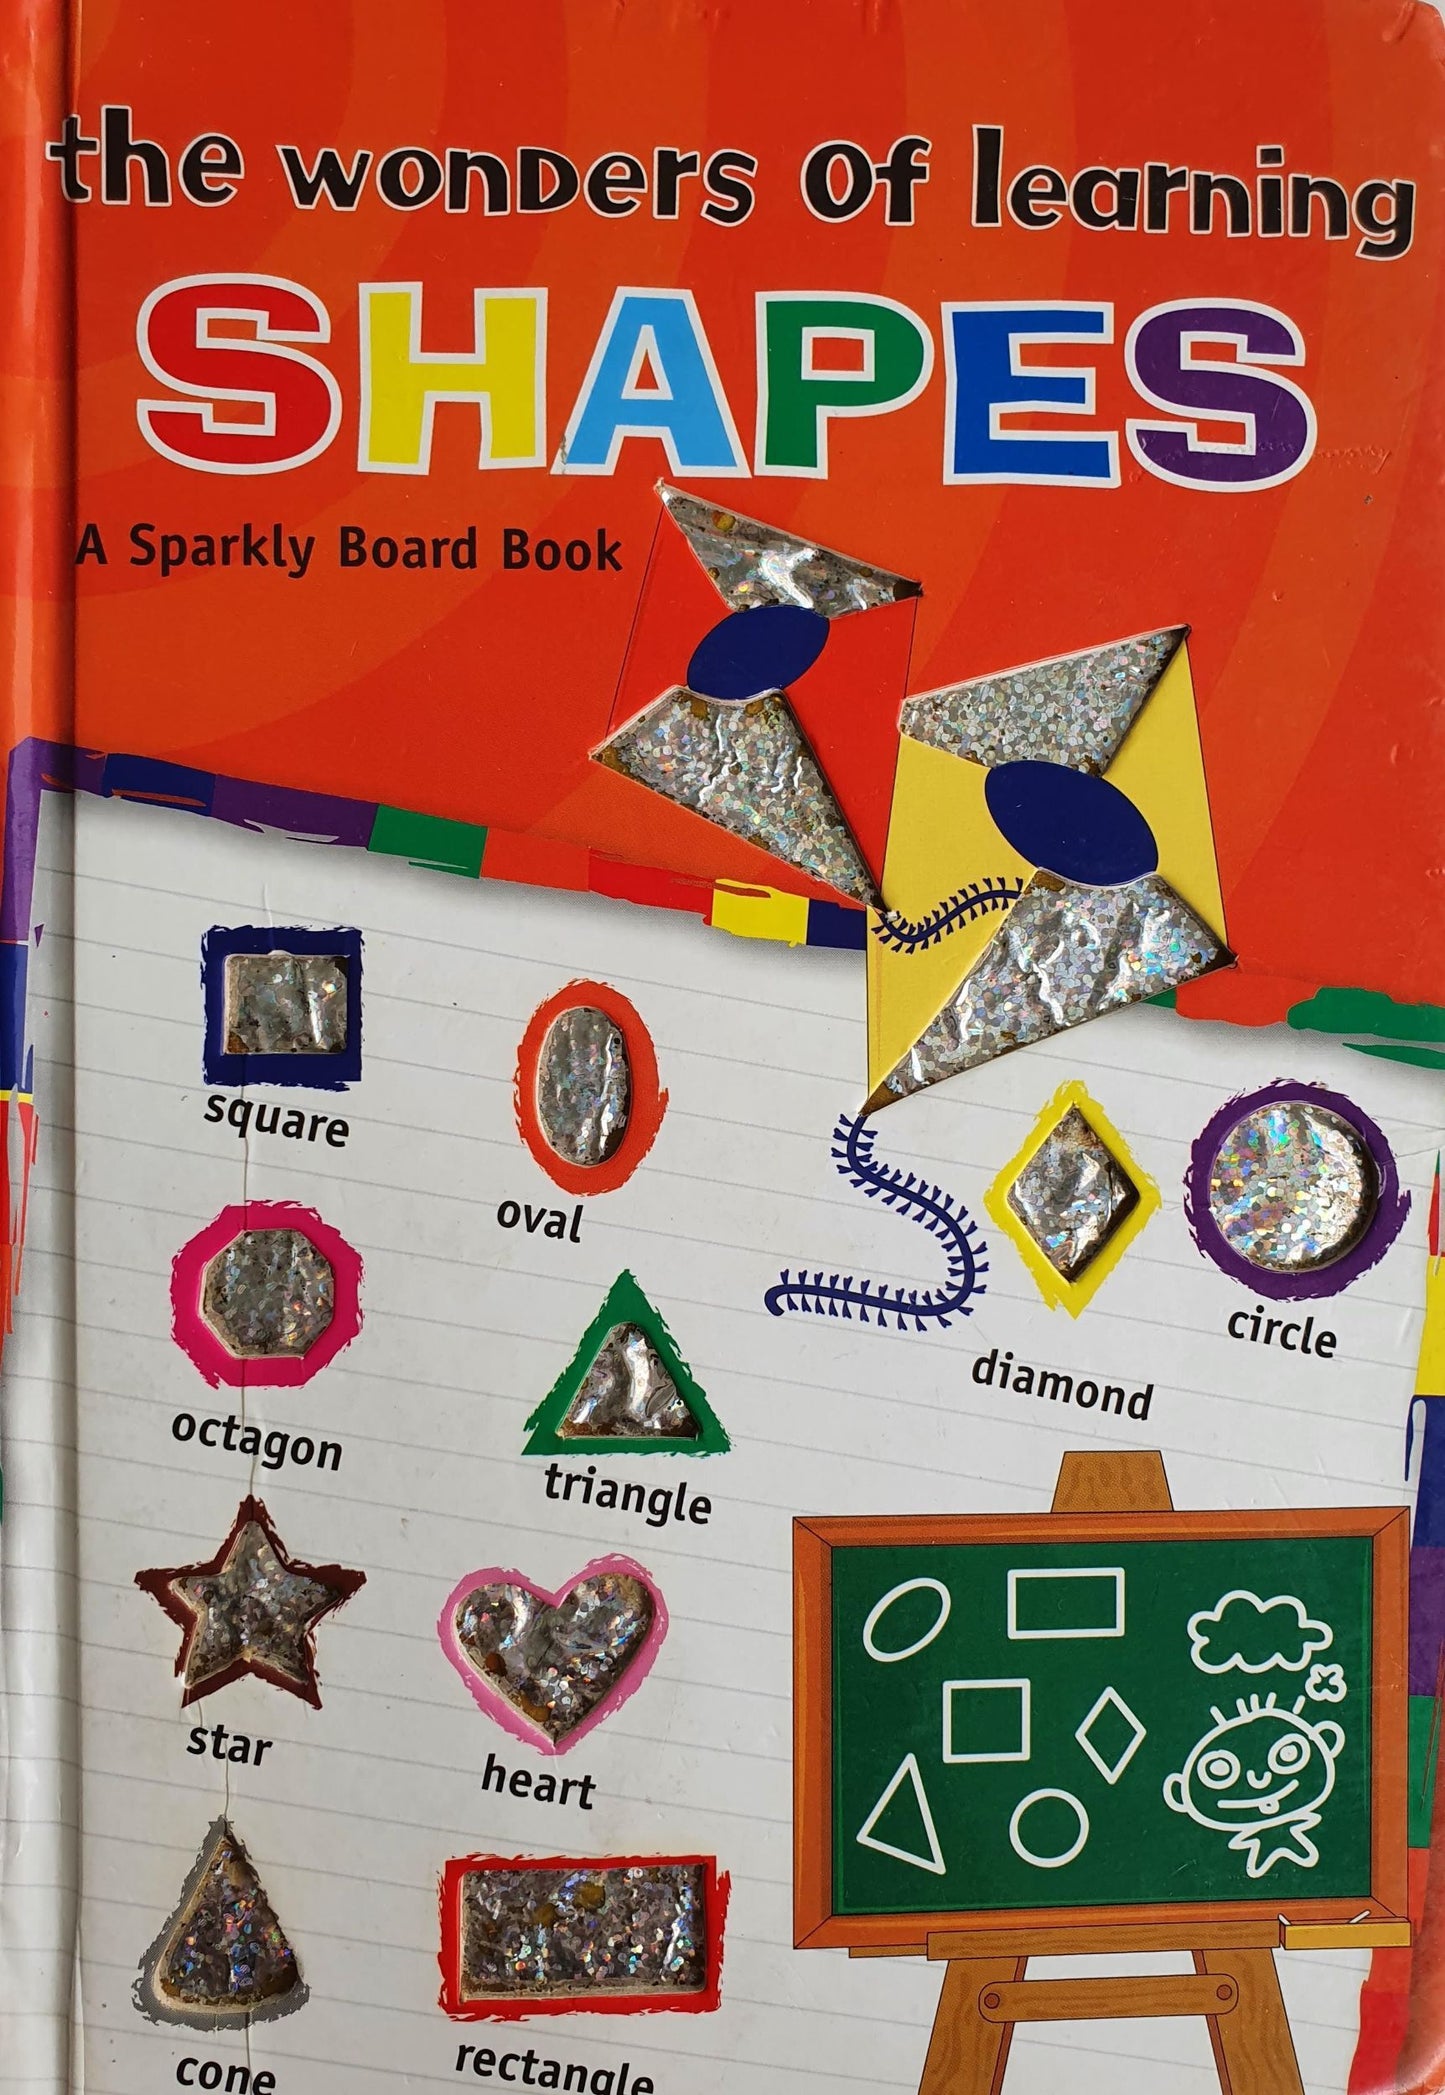 The wonders of learning shapes Well Read Not Applicable  (4603217739831)